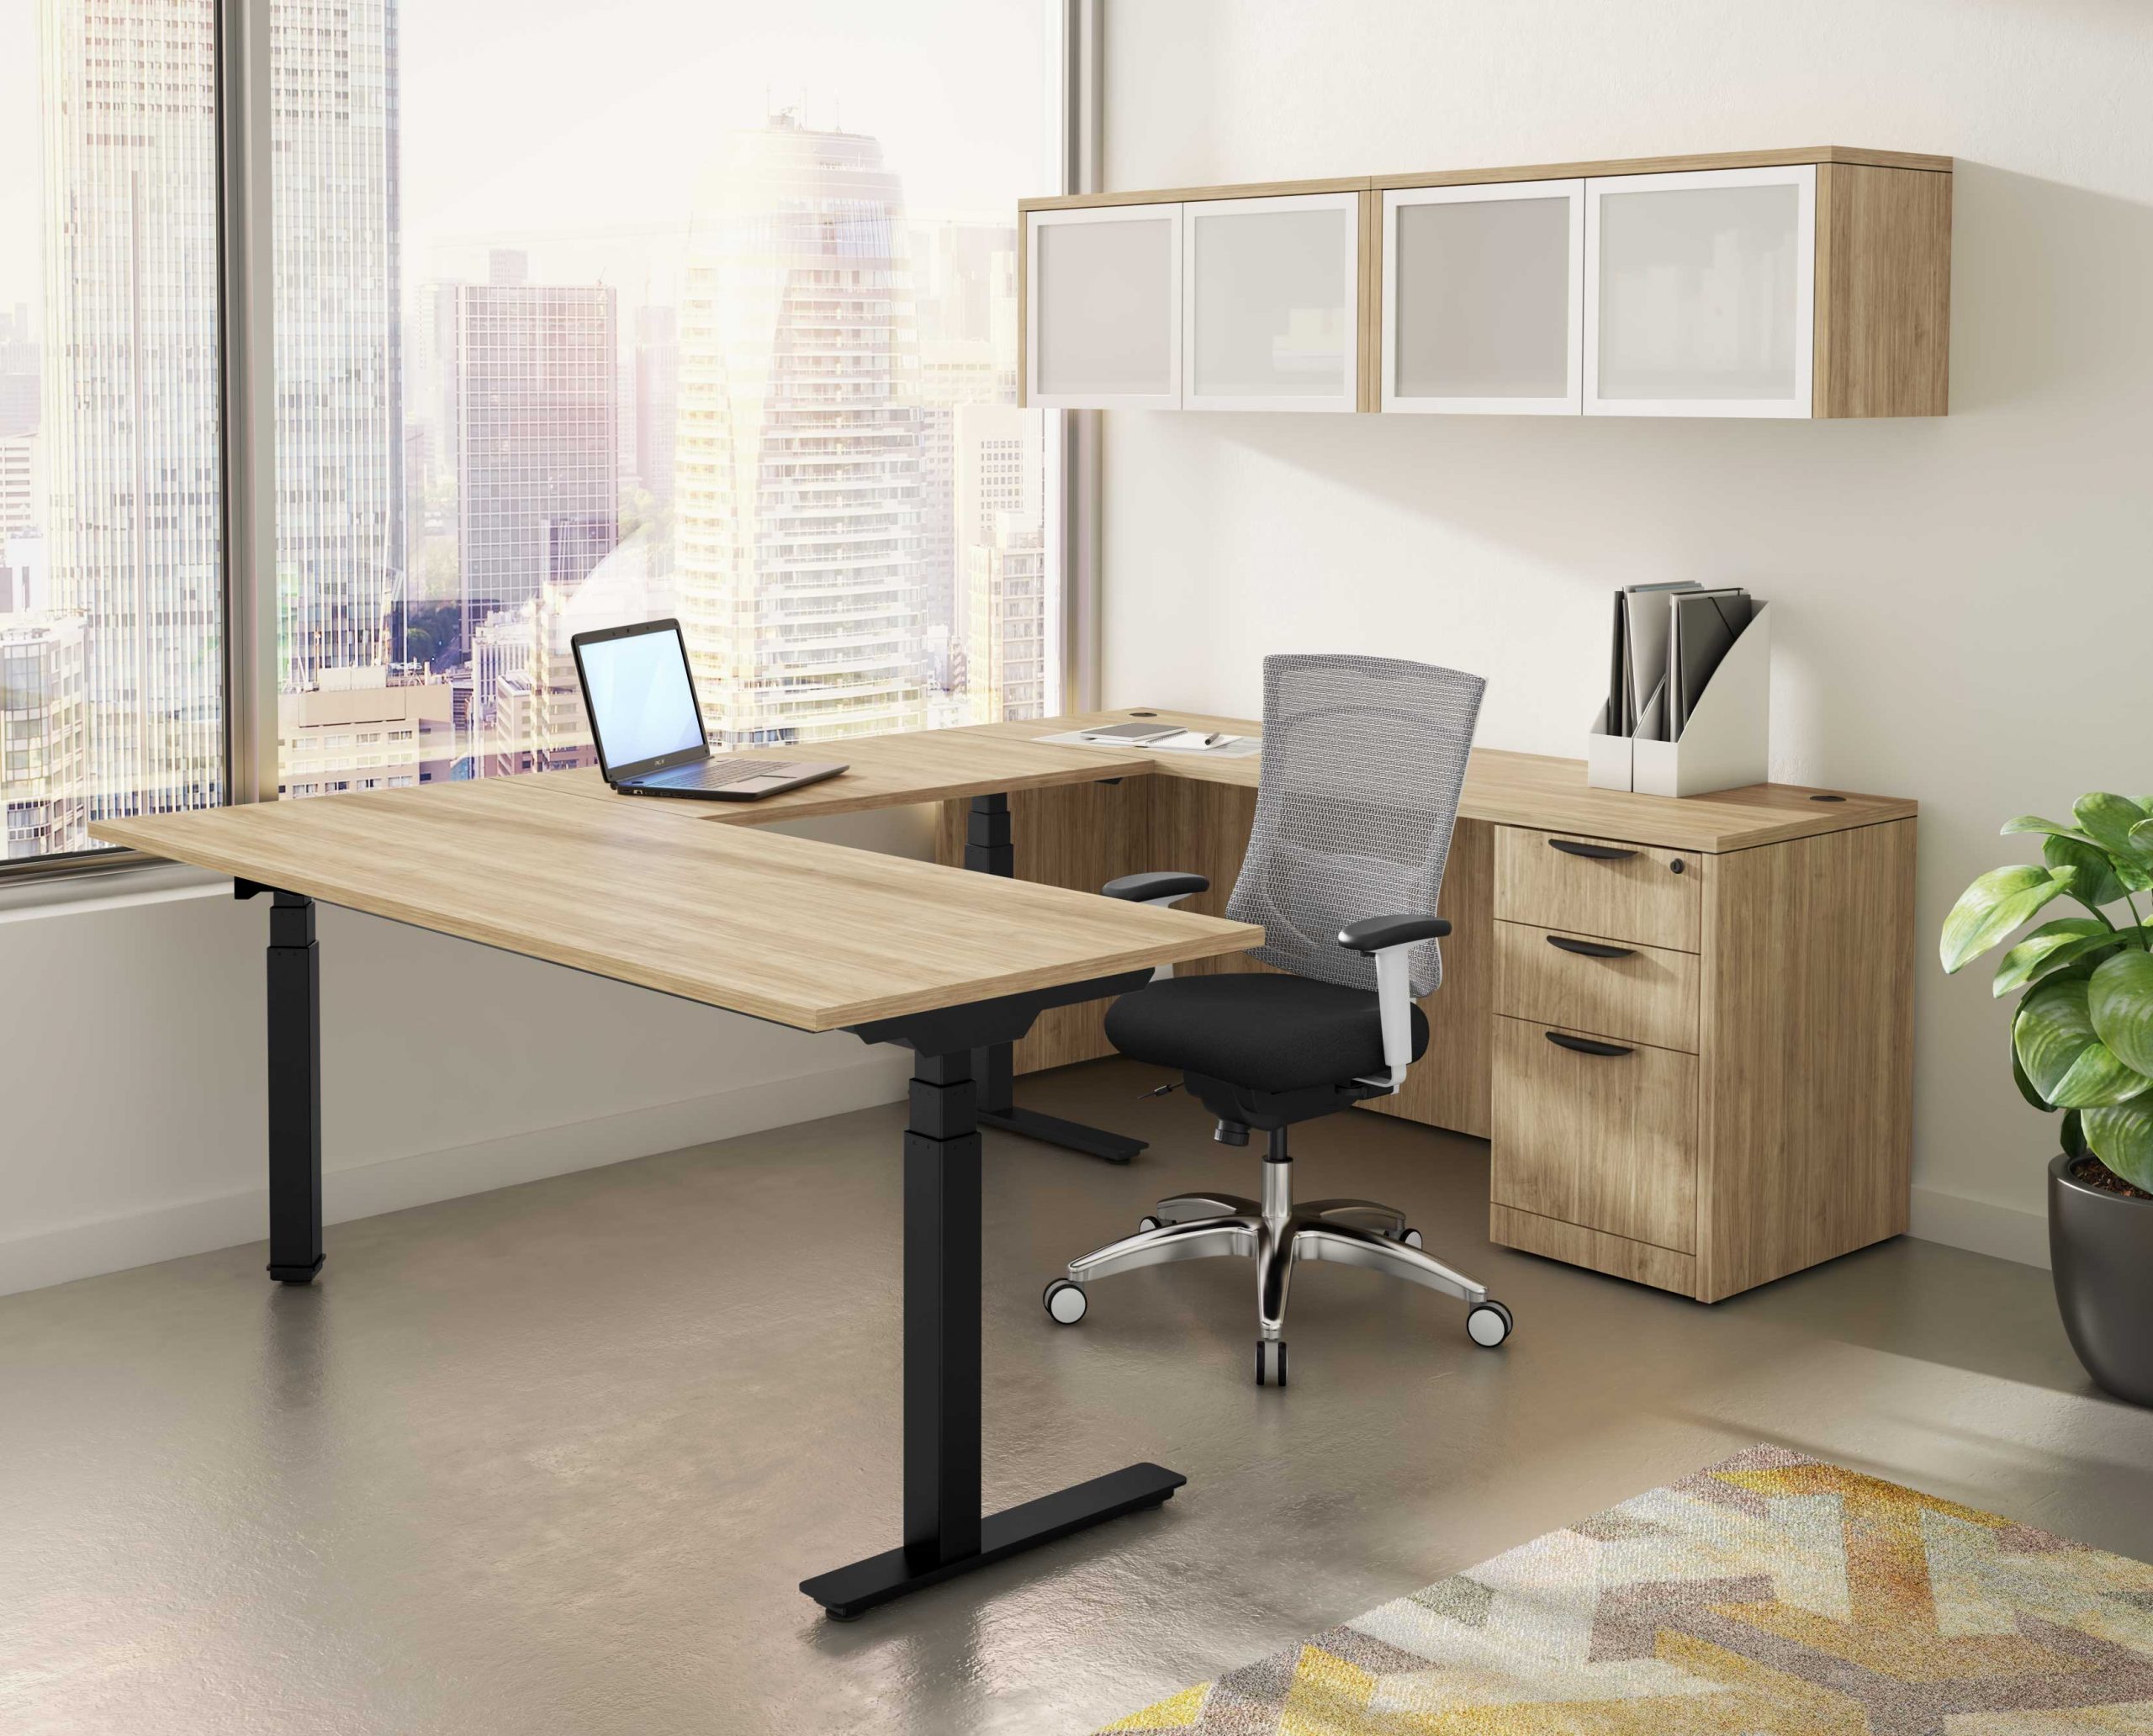 U Shaped Standing Desk 1 Electric Standing Desks: Which Type Is the Right One for Your Home Office? - 9